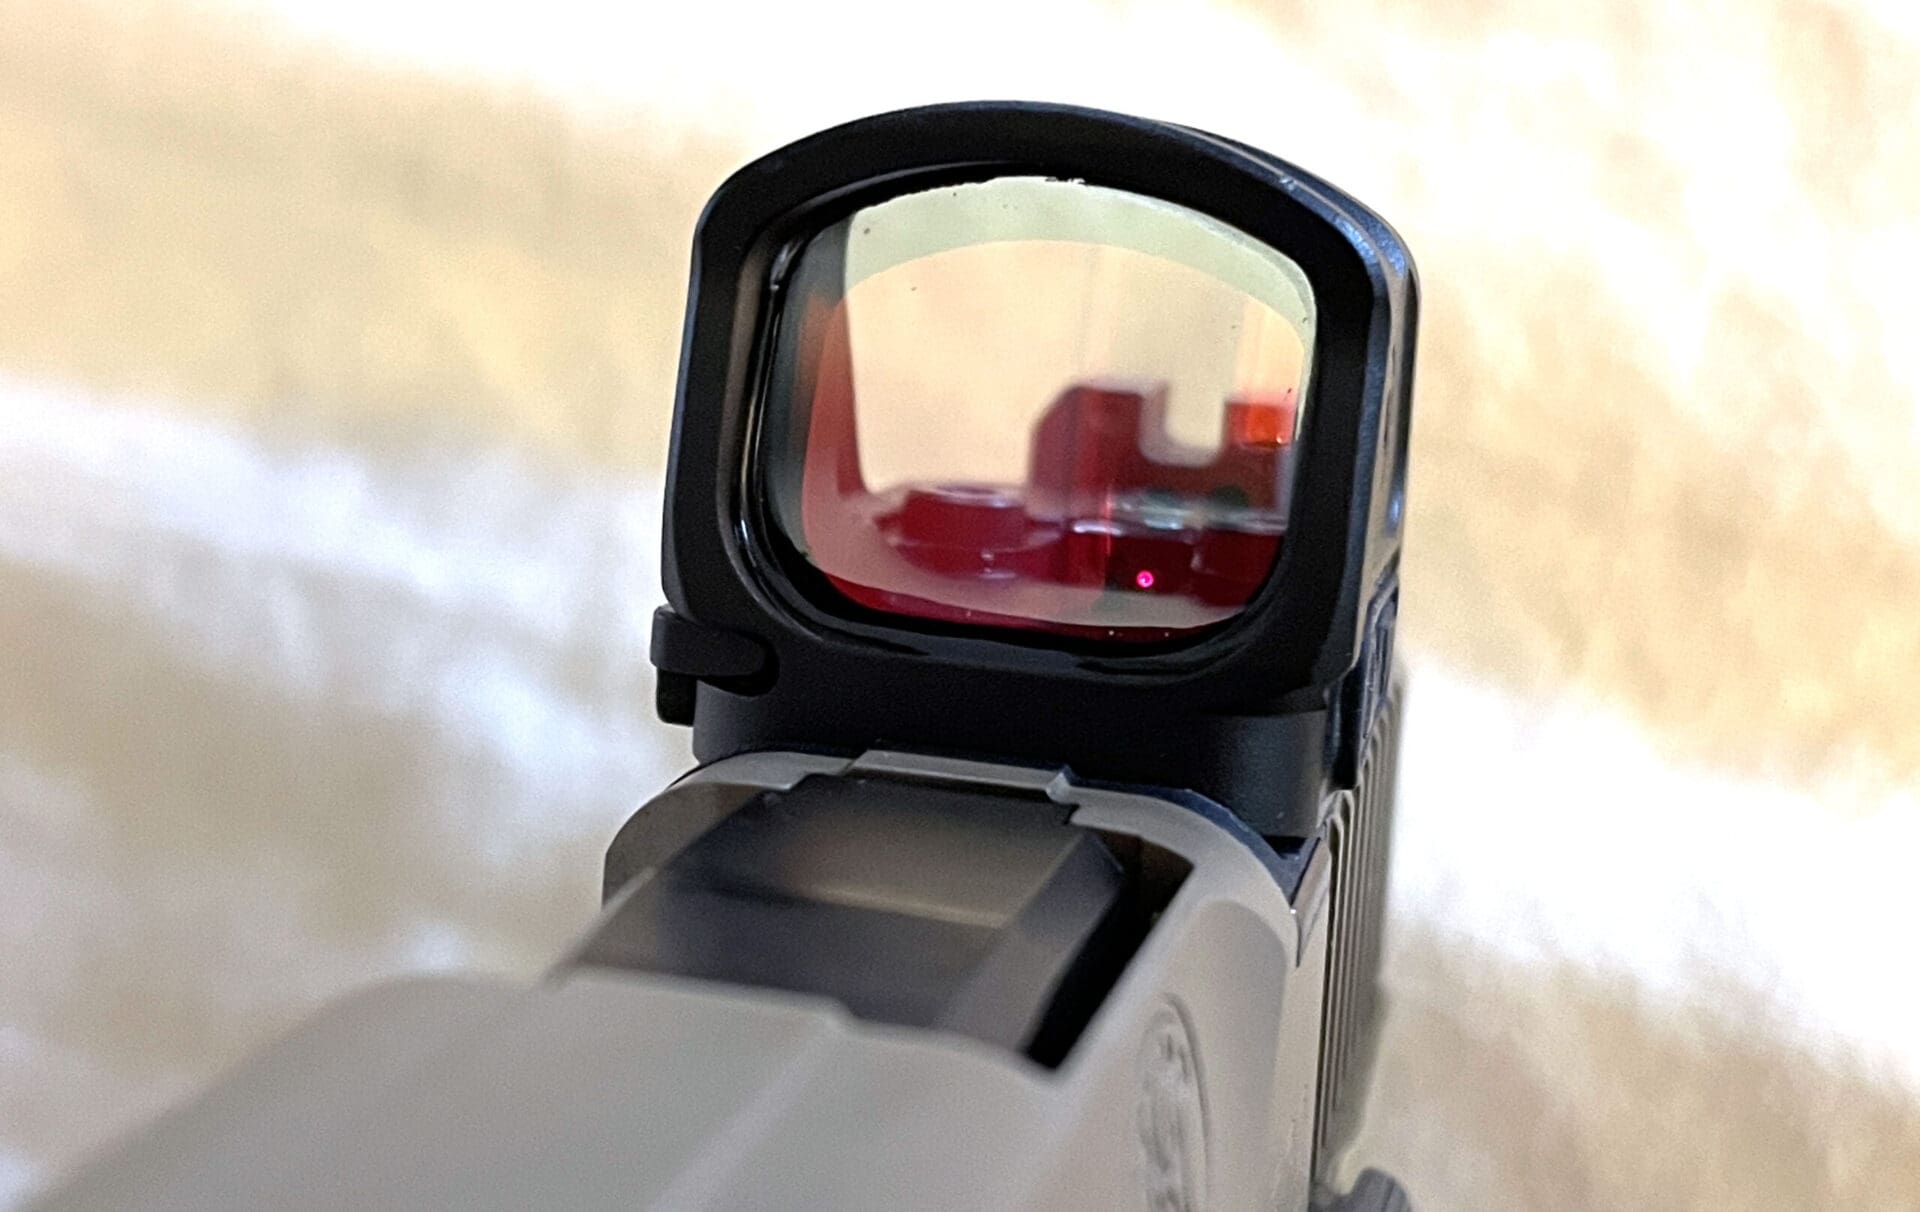 Primary Arms SLx RS-10 red dot sight